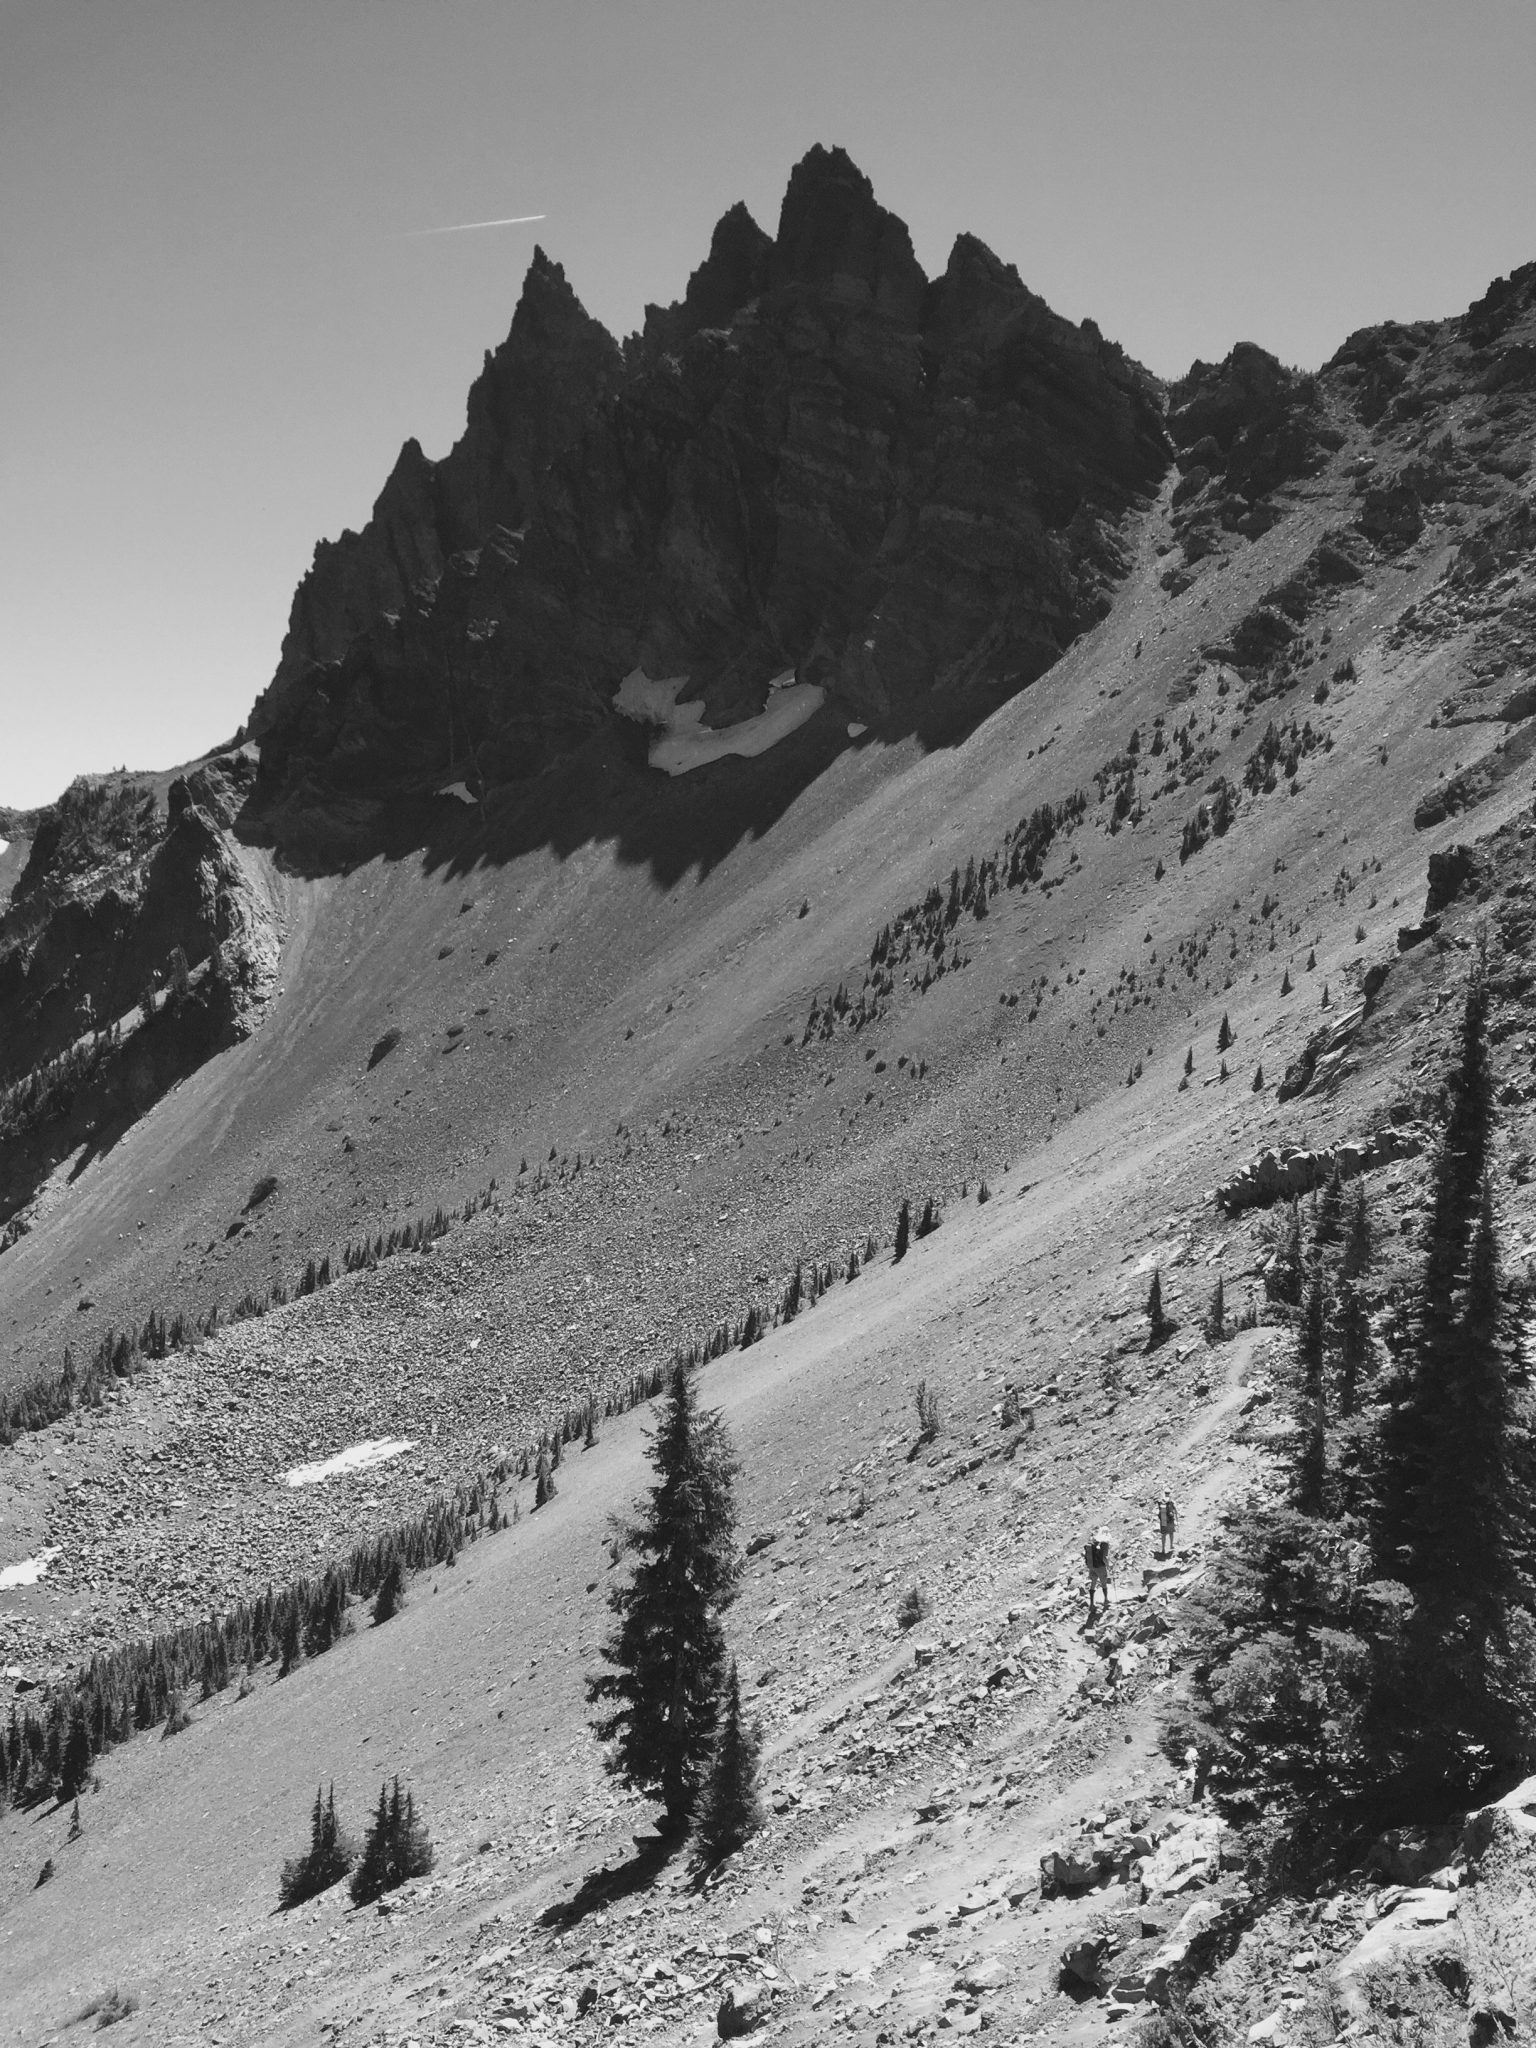 Talus slopes sweeping up to steep north face of Three Fingered Jack